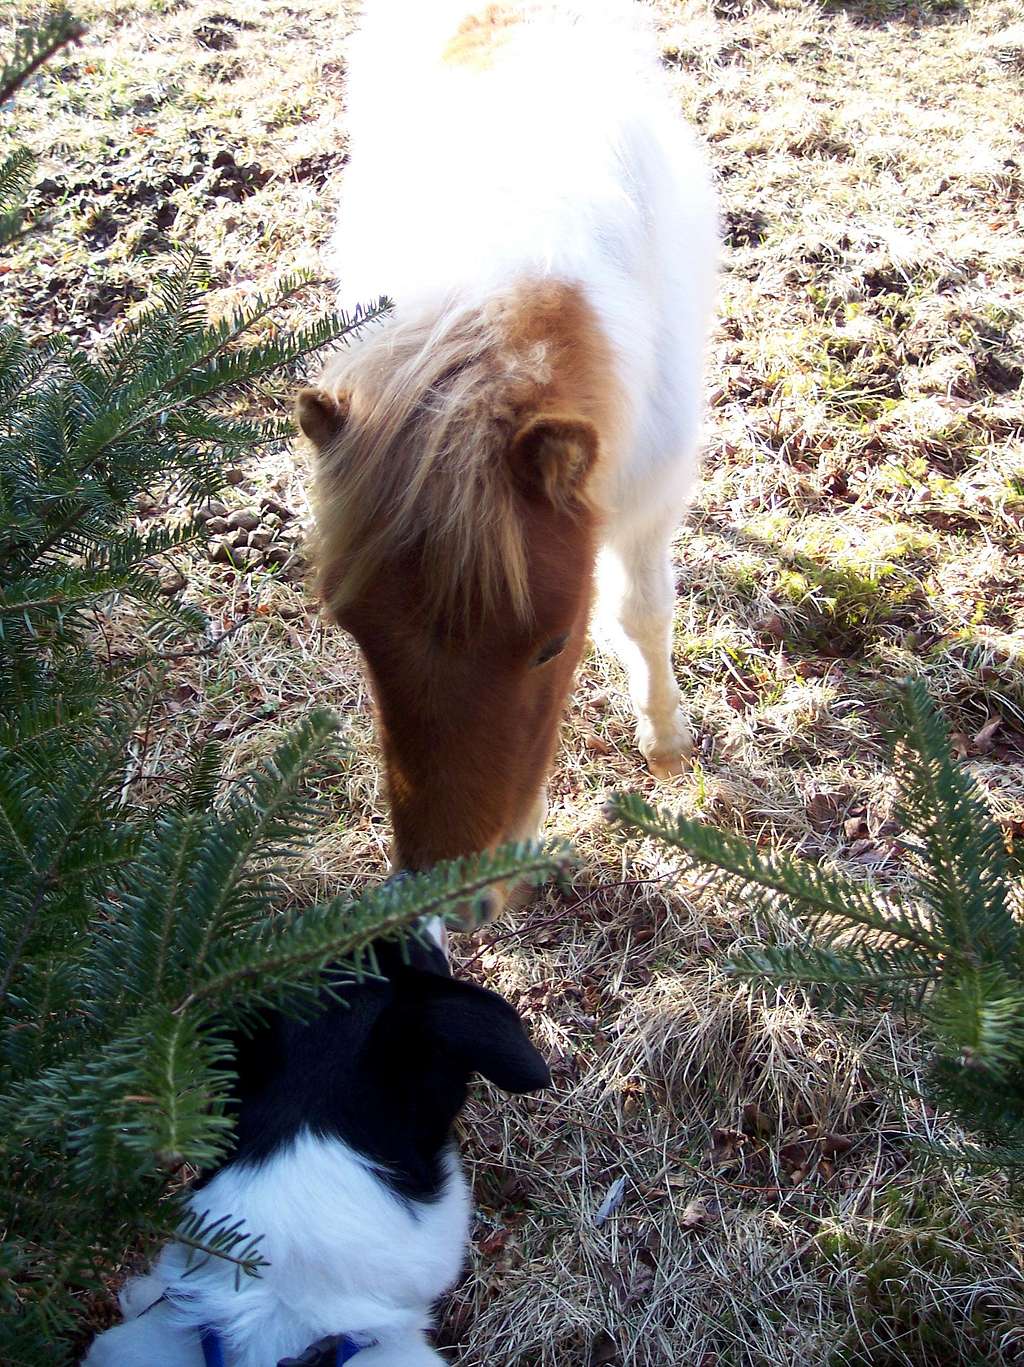 Apparently, Dogs and Ponies Get Along